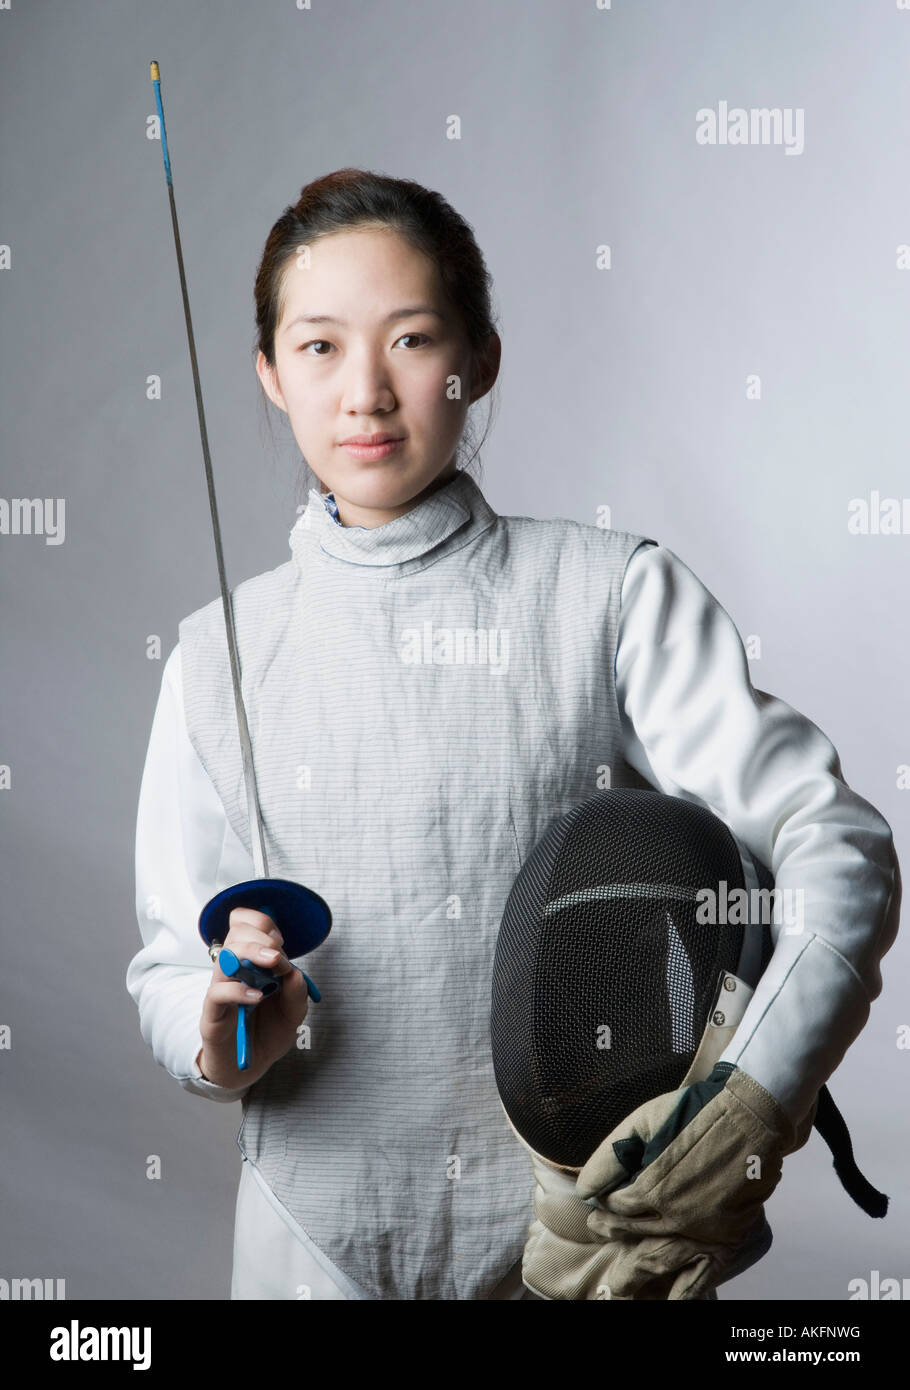 Portrait of a female fencer holding a sword and a fencing mask Stock Photo